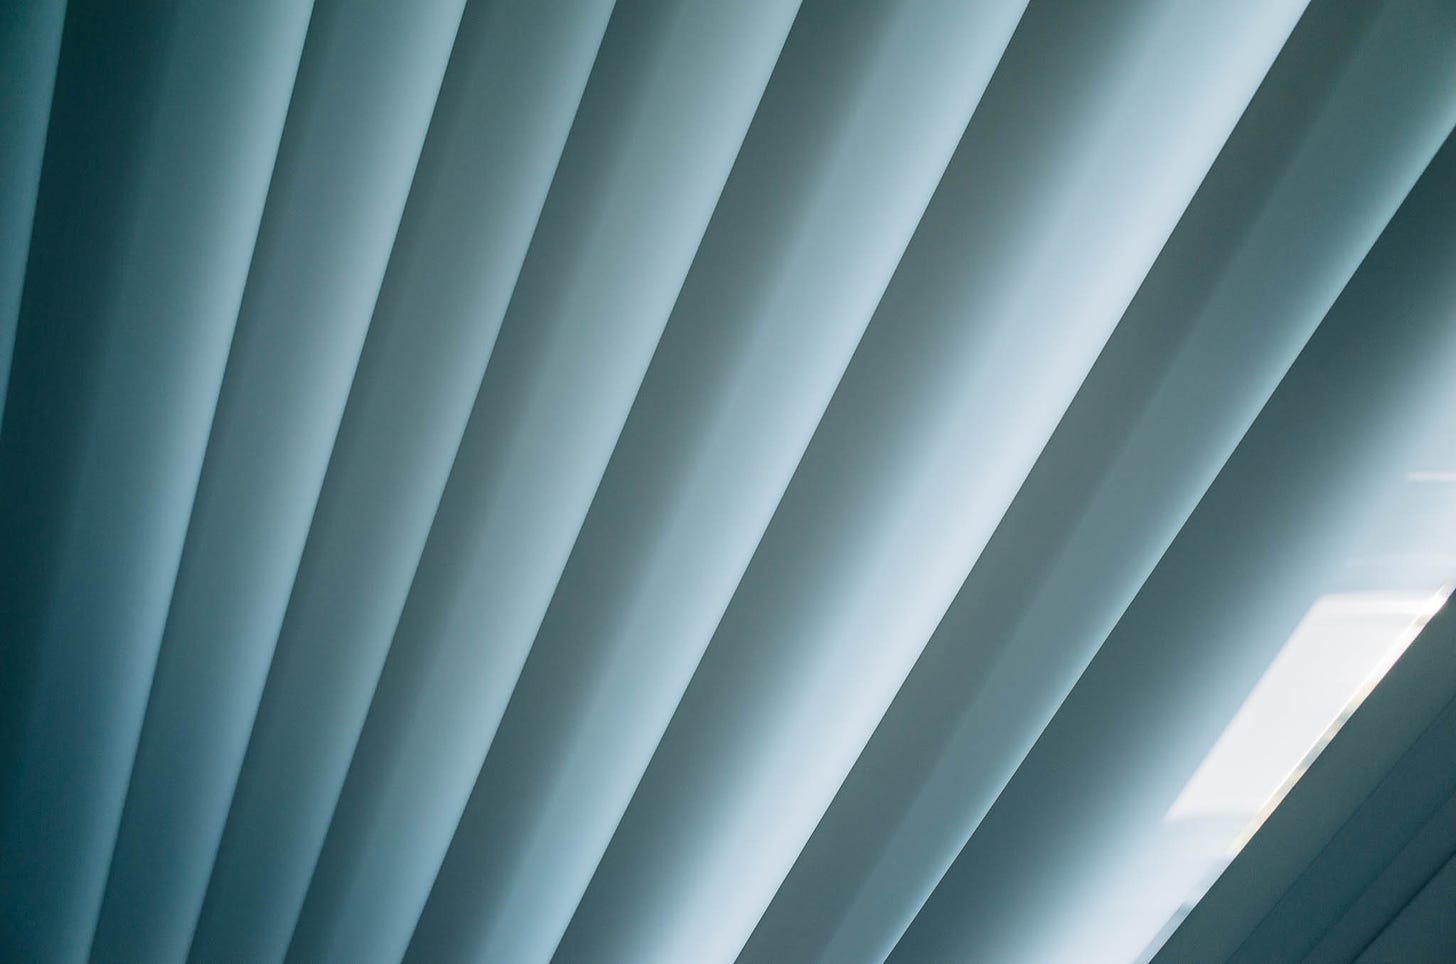 Abstract point of view of mini-blinds